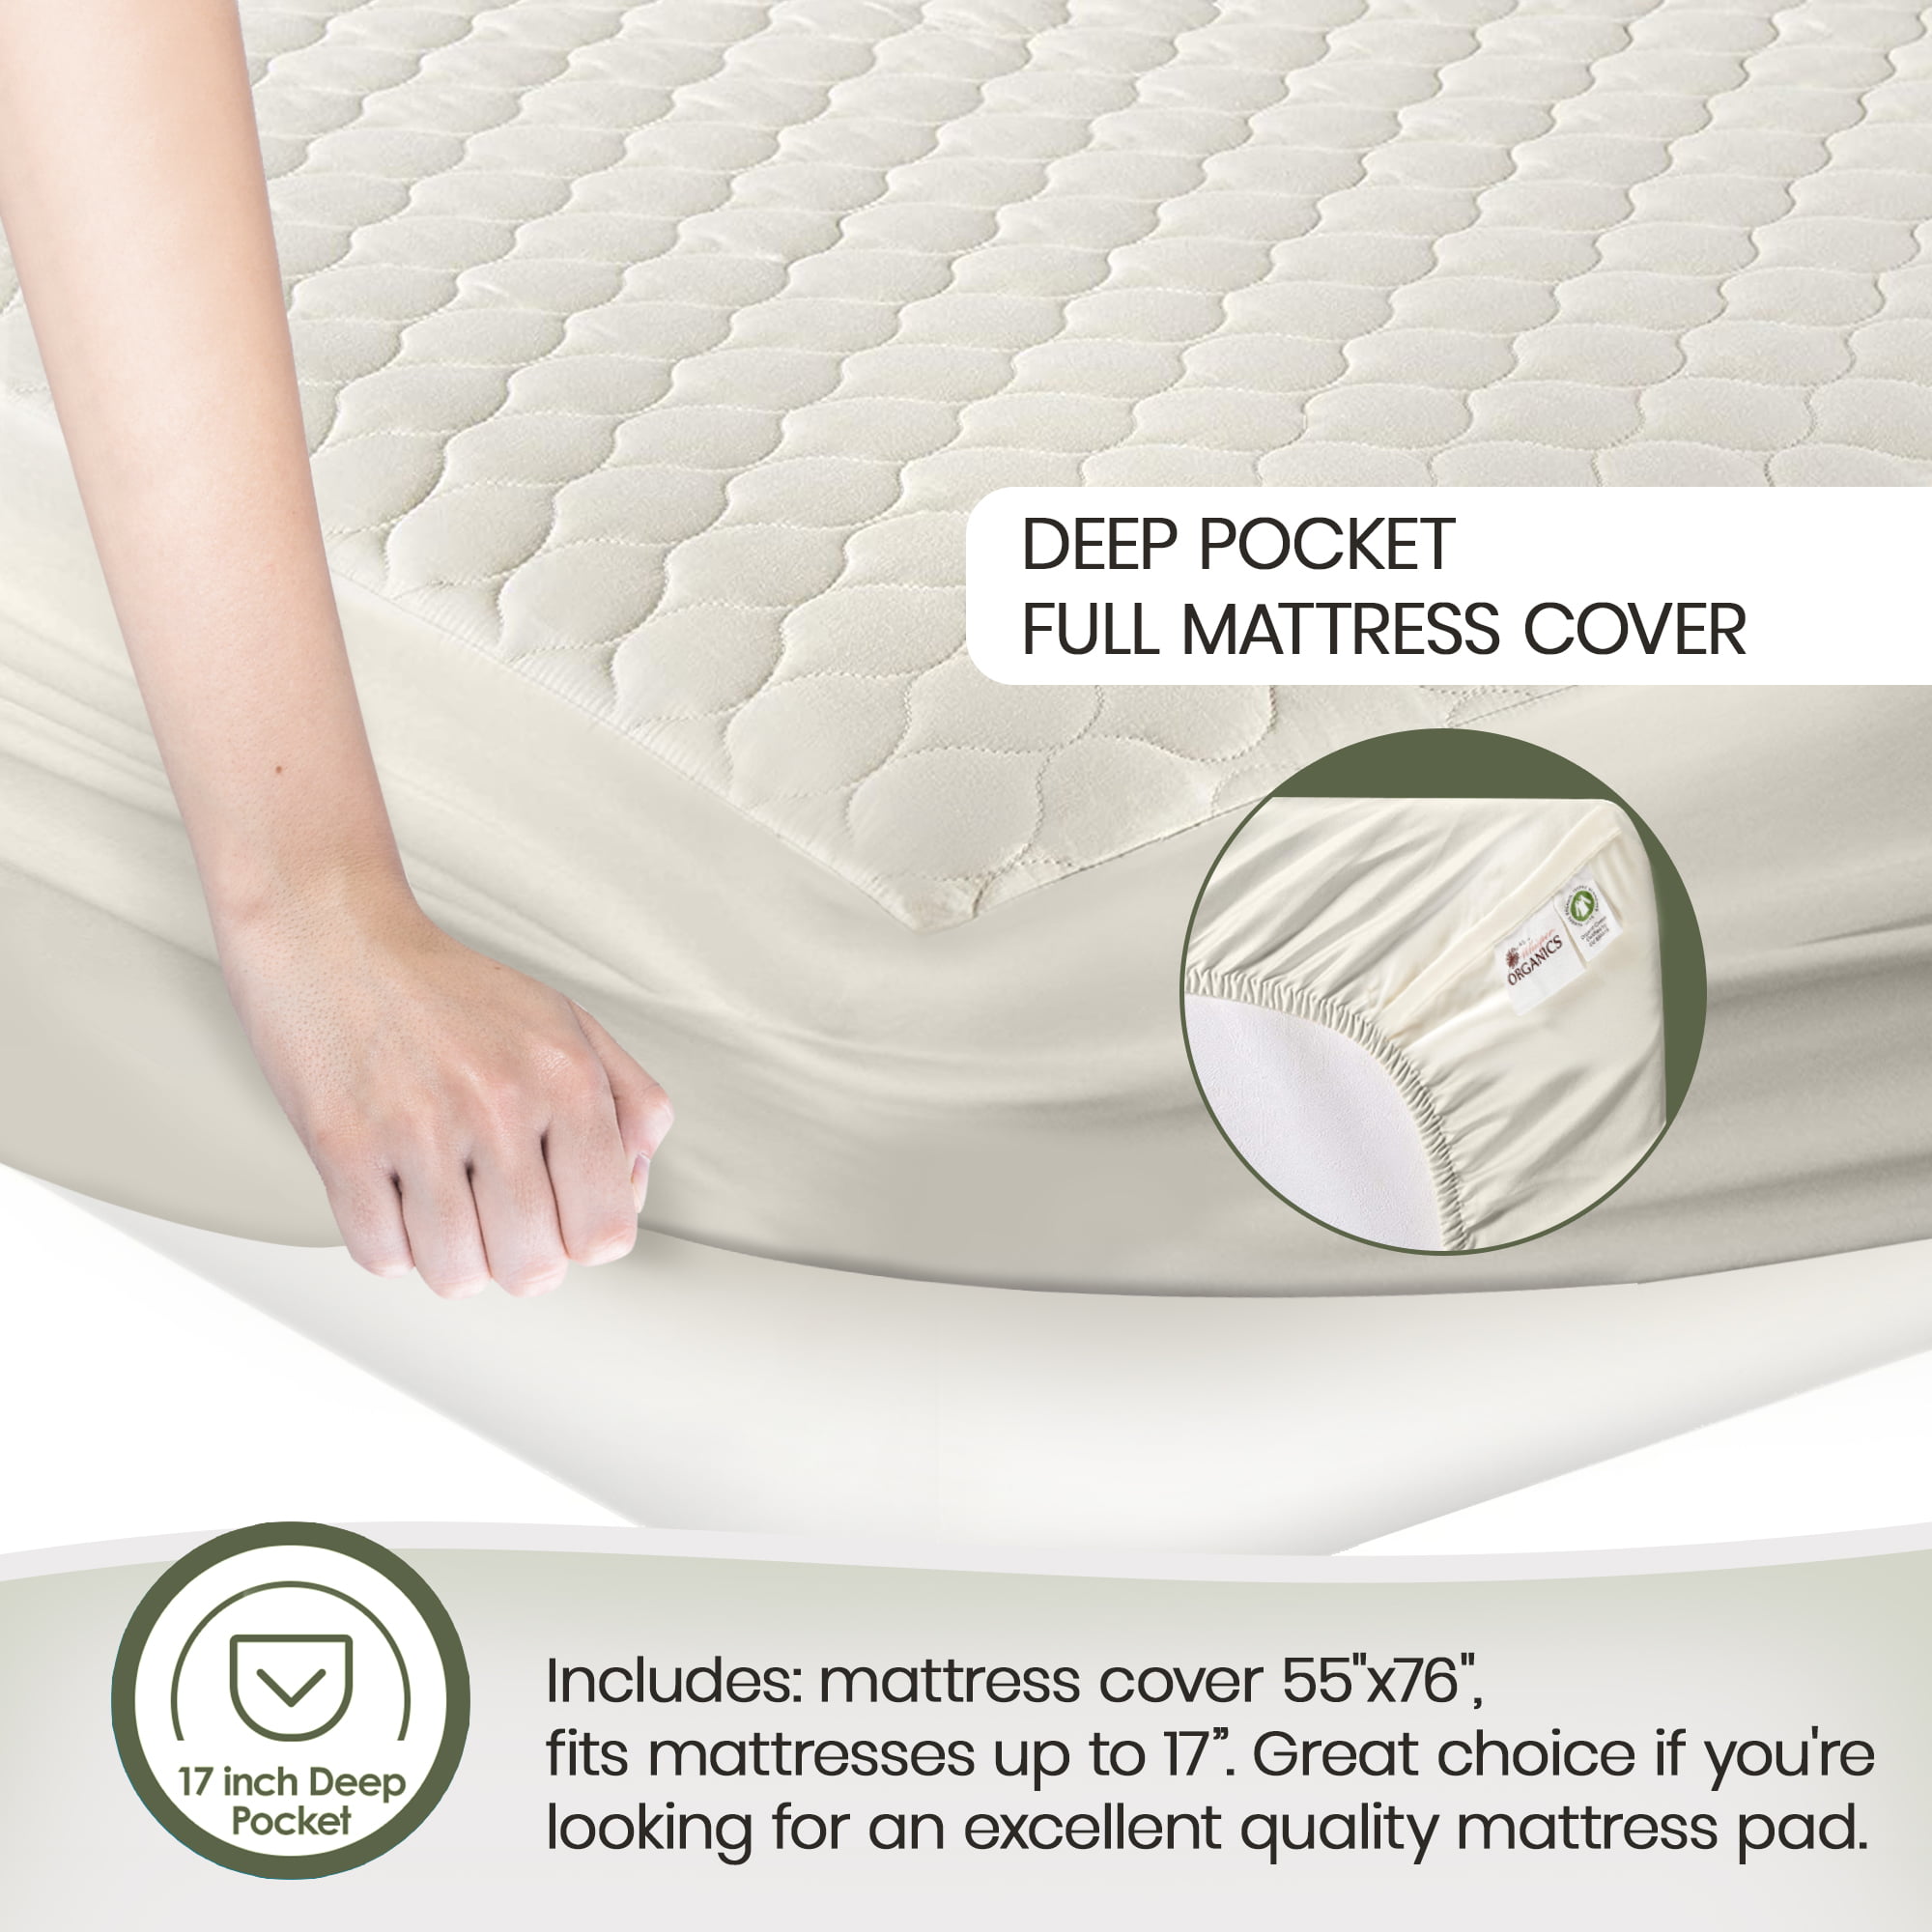 100% Organic Cotton Mattress Pad Quilted Deep Pocket Cover Ivory Color GOTS New 